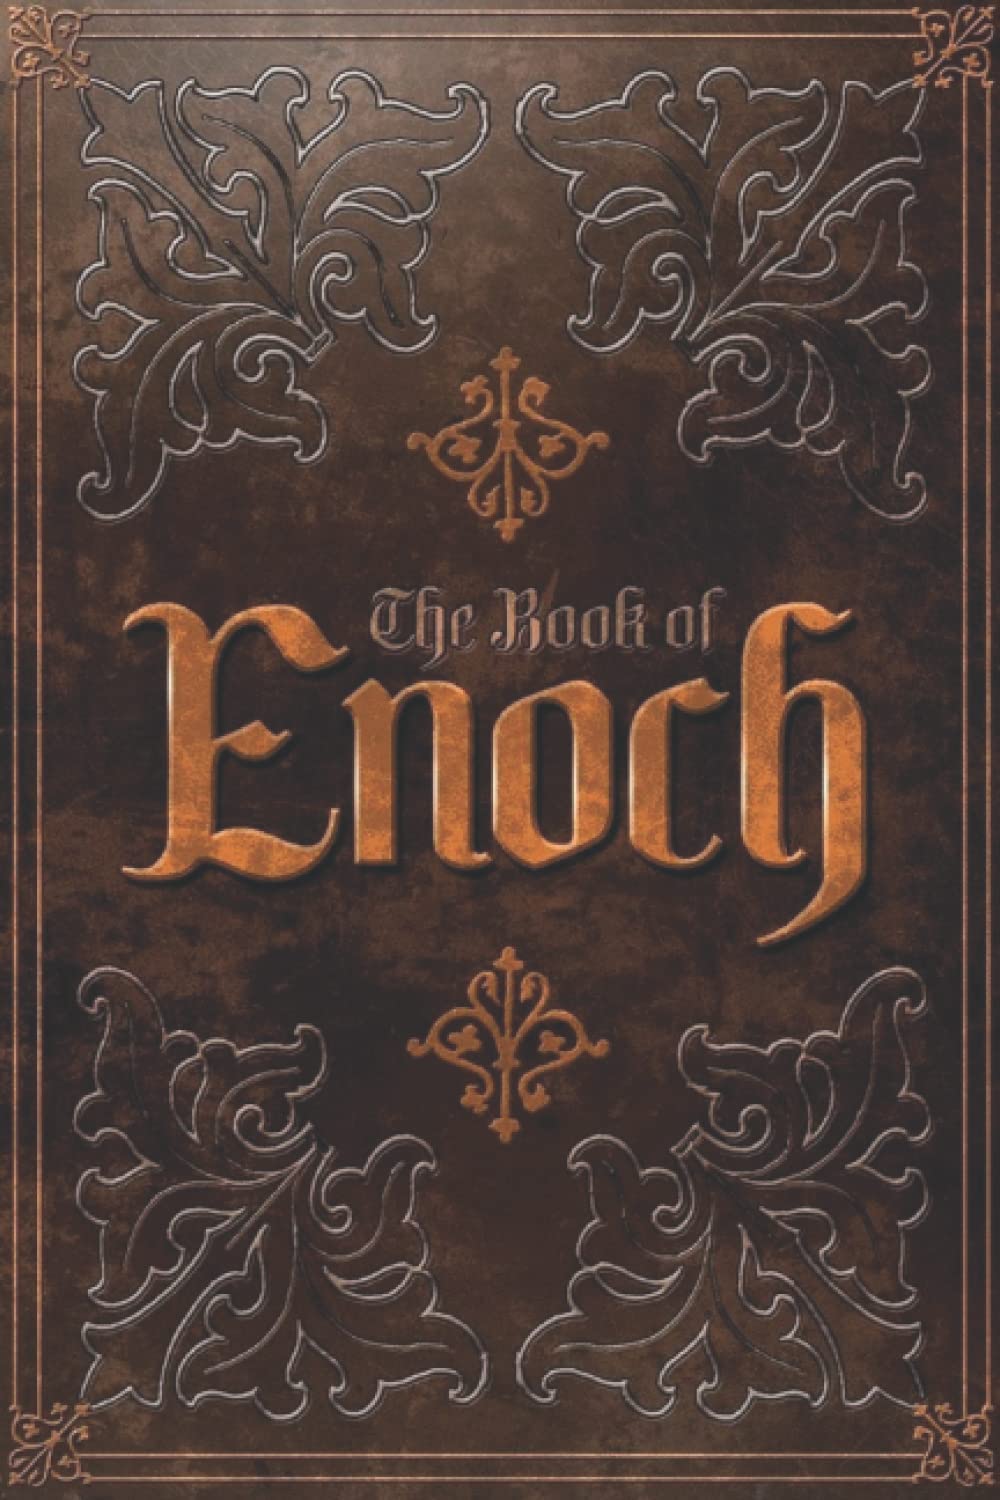 THE BOOK OF ENOCH: From-The Apocrypha and Pseudepigrapha of the Old Testament